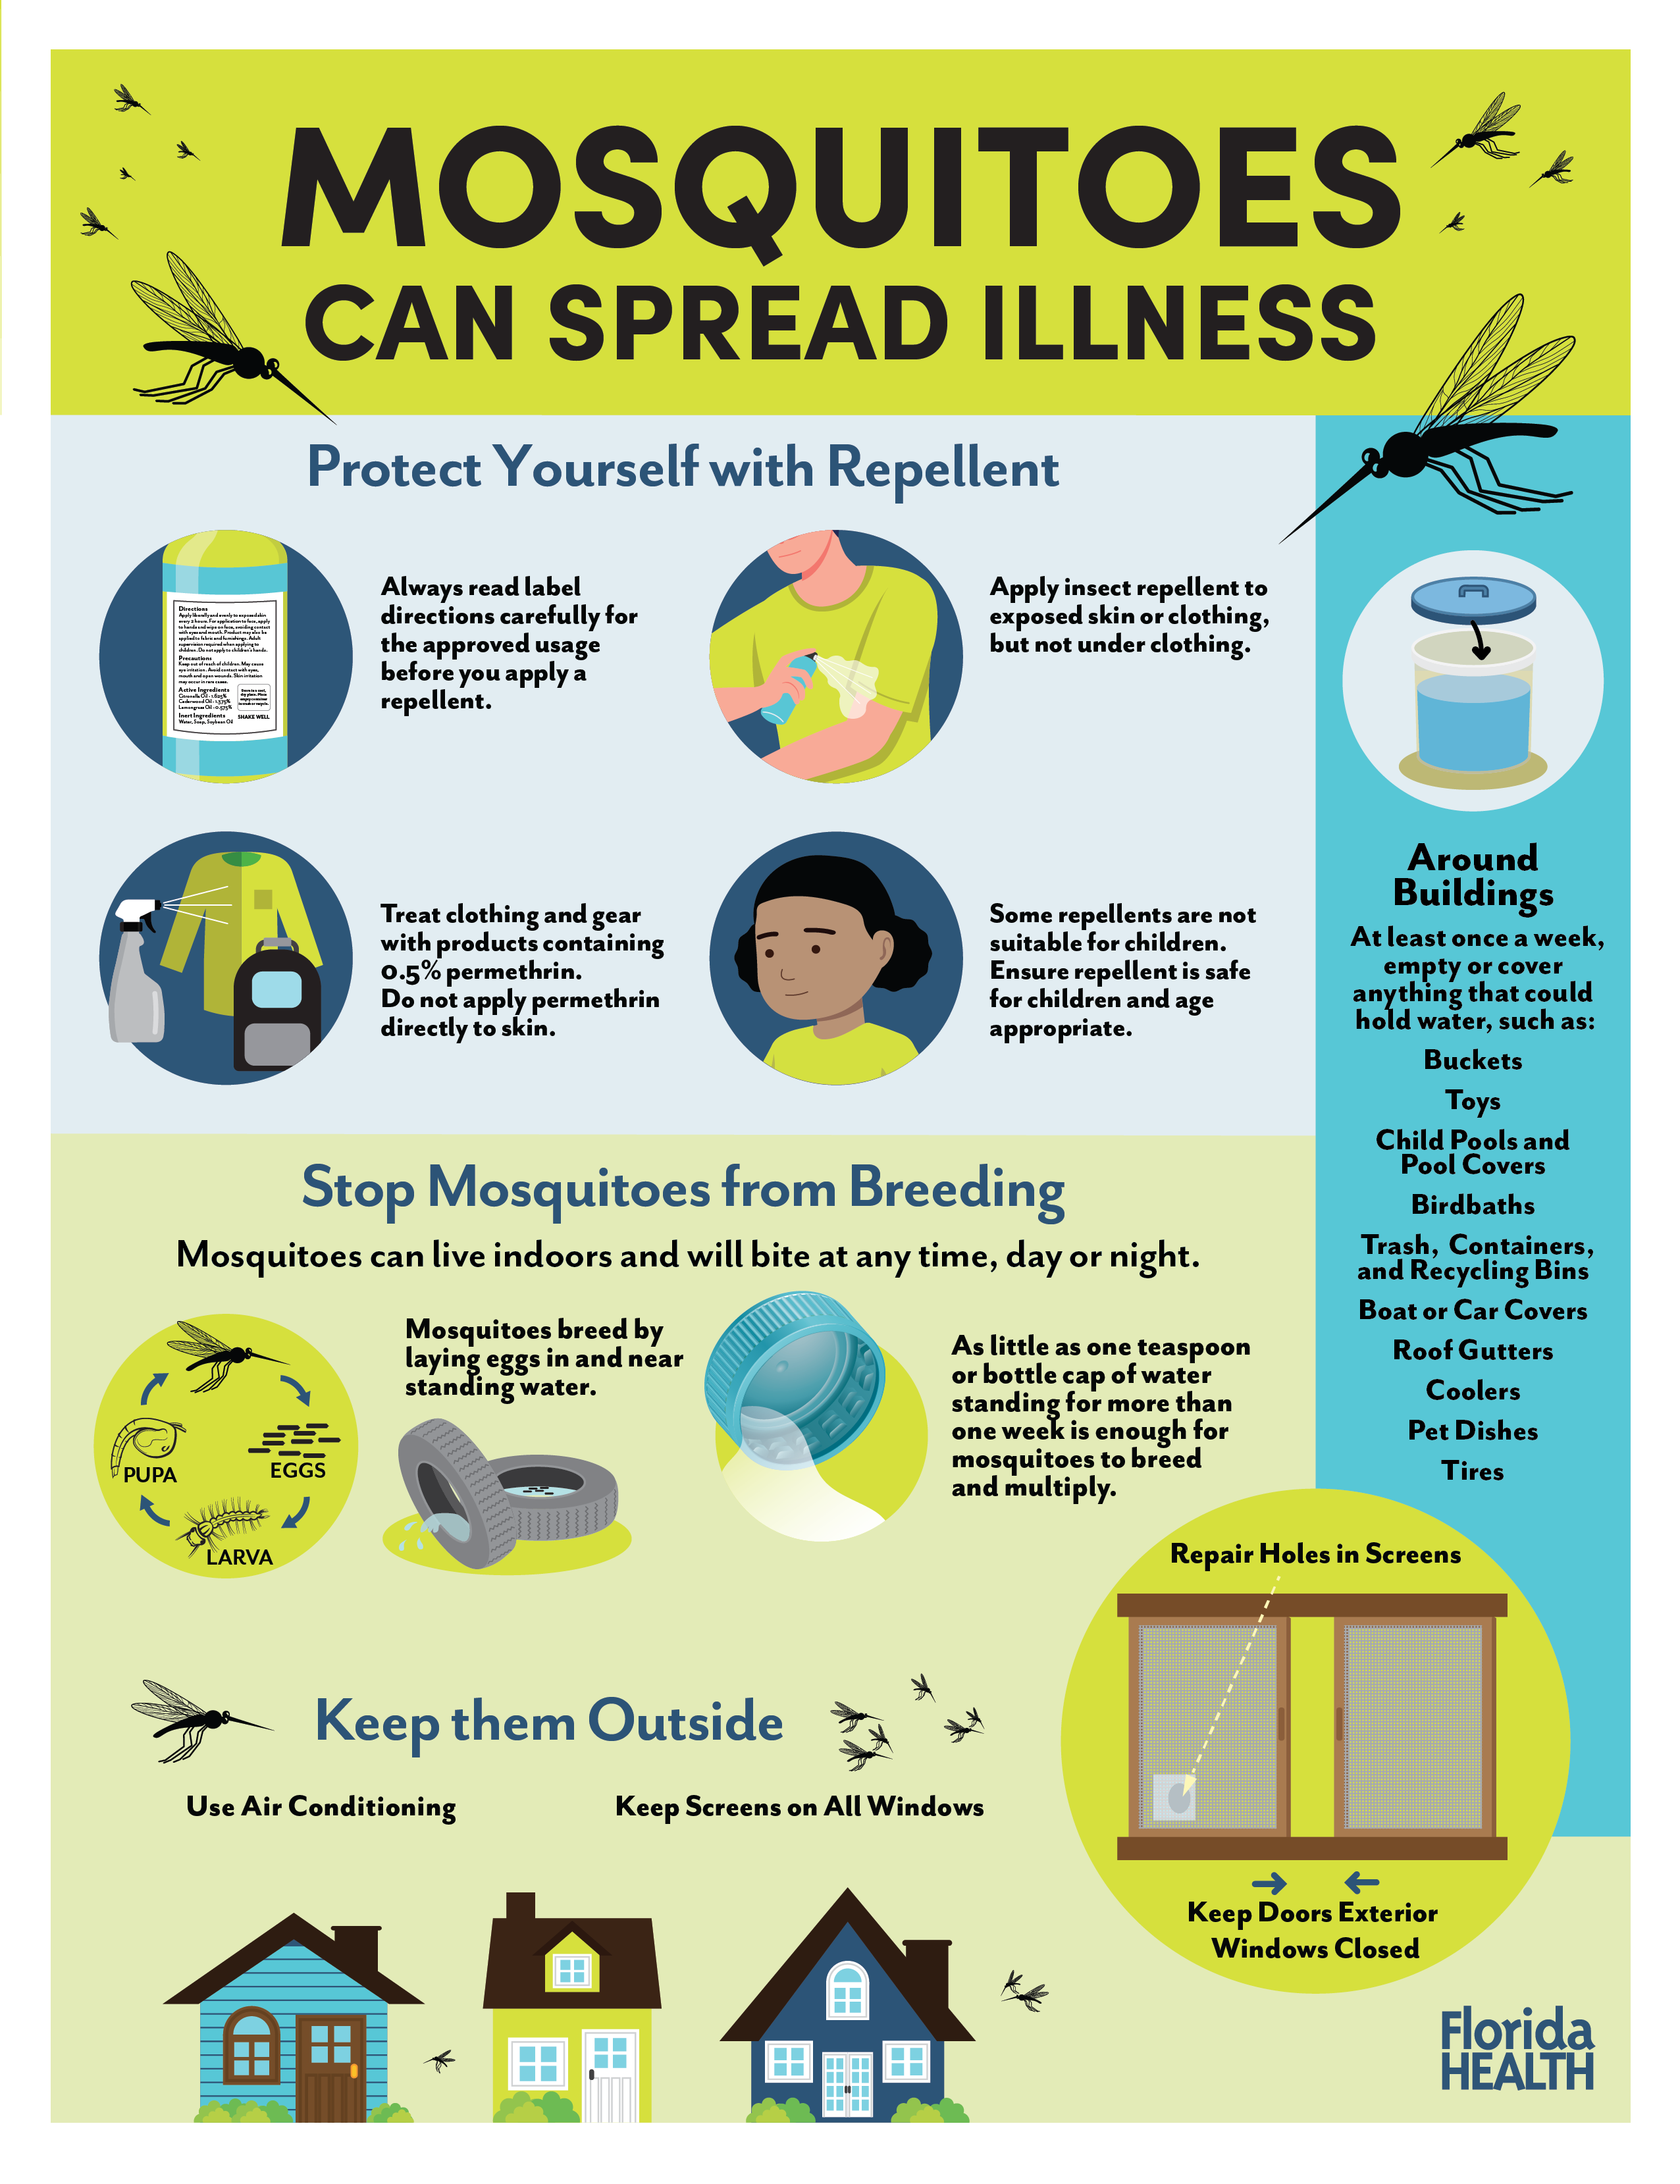 Florida Health image. Image is of Mosquito Prevention Poster (English | Español) linked below.